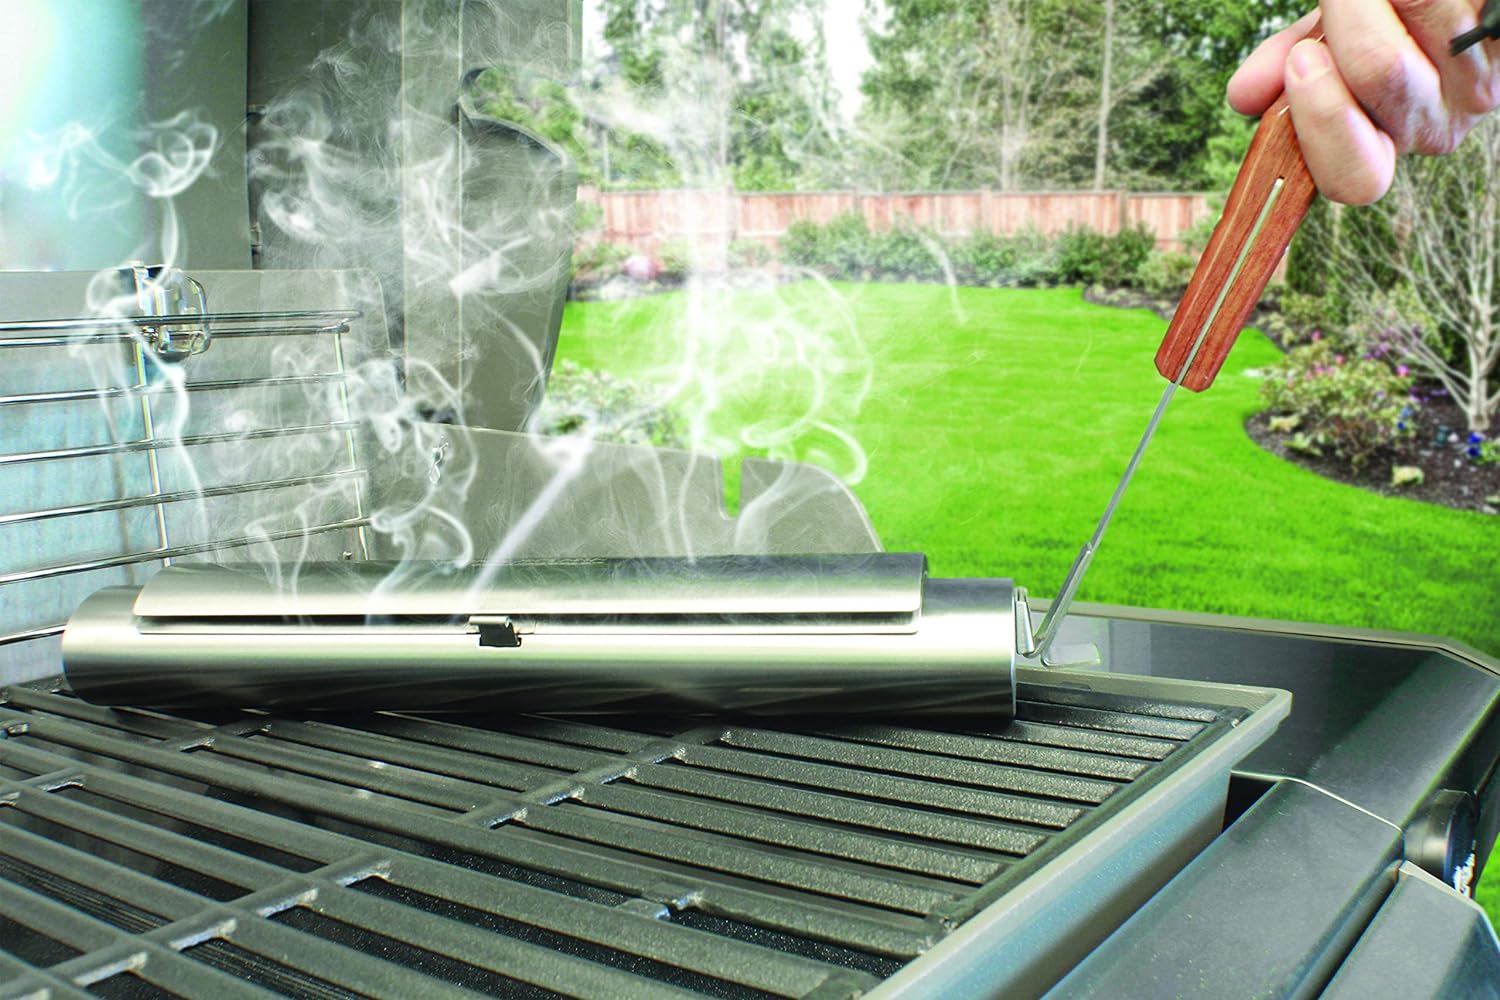 Today’s Gadget is the Stainless Steel Smoker Tube!